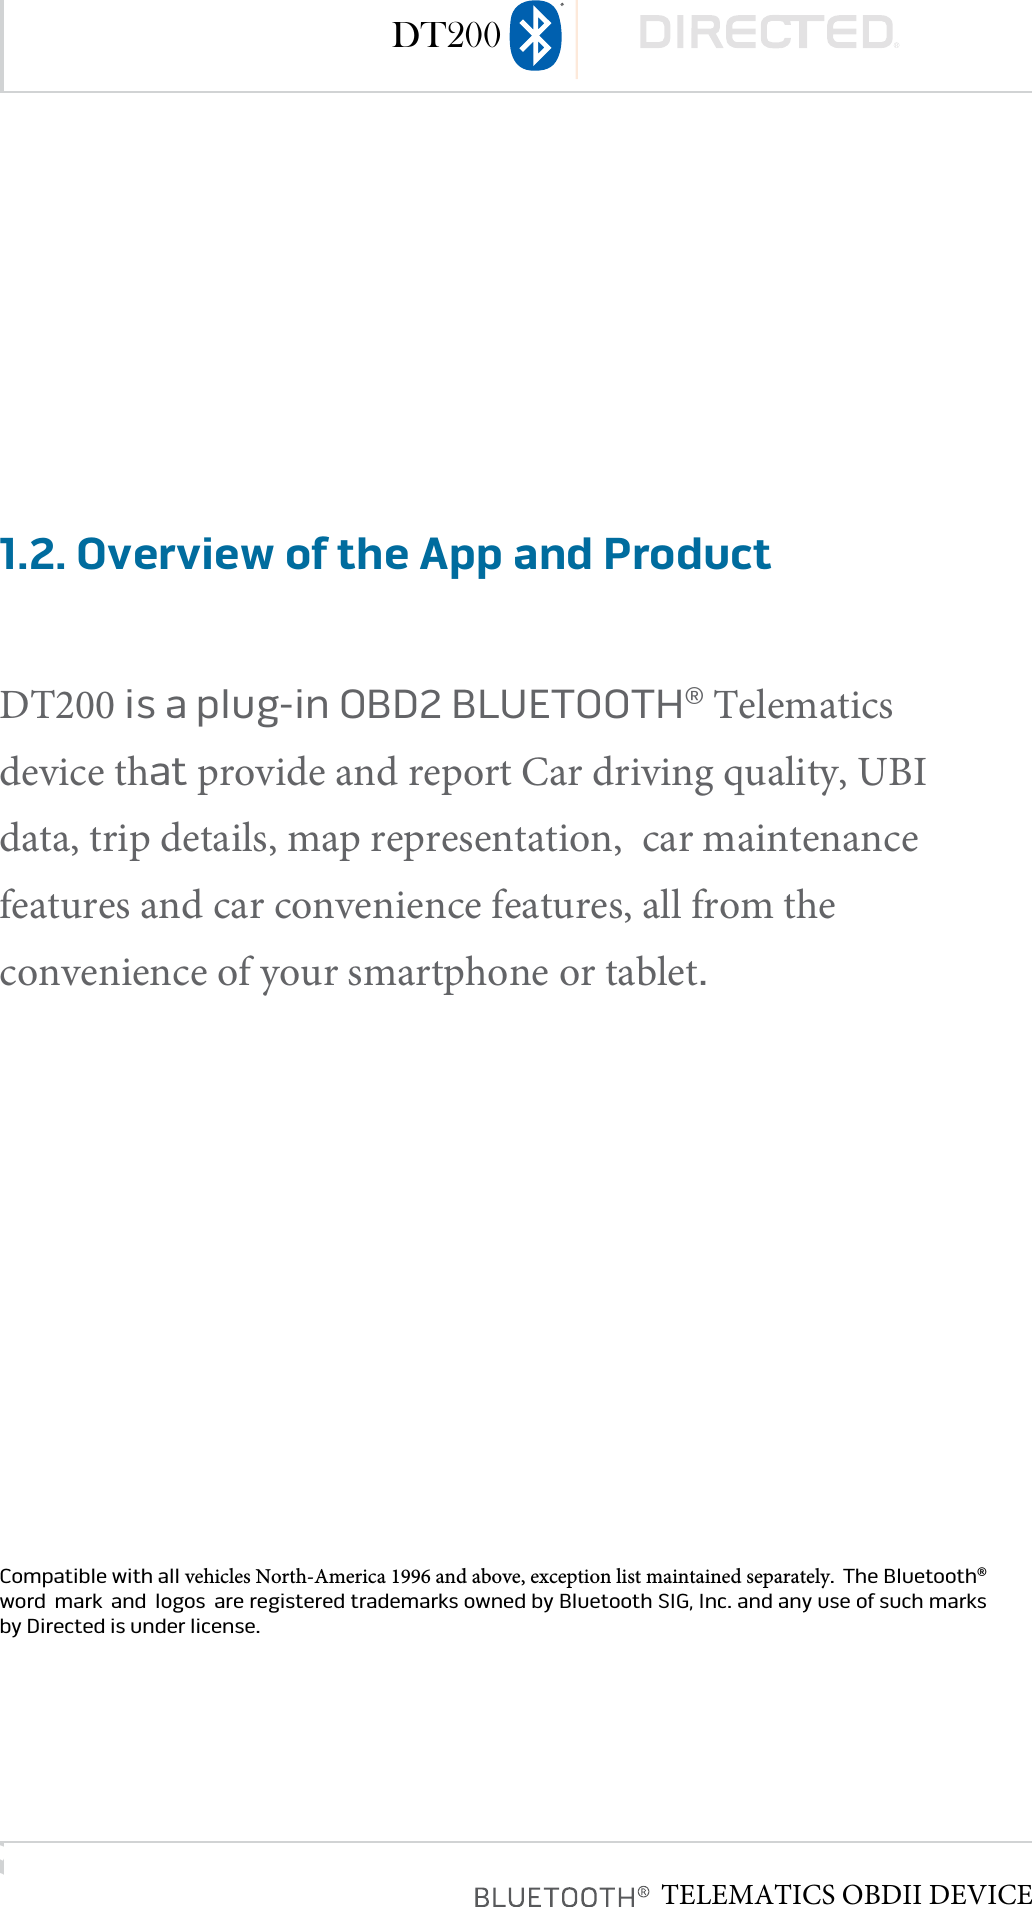 page 61.2. Overview of the App and ProductDT200 is a plug-in OBD2 BLUETOOTH® Telematics device that provide and report Car driving quality, UBI data, trip details, map representation,  car maintenance features and car convenience features, all from the convenience of your smartphone or tablet�Compatible with all vehicles North-America 1996 and above, exception list maintained separately�  The Bluetooth® word  mark  and  logos  are registered trademarks owned by Bluetooth SIG, Inc� and any use of such marks by Directed is under license� DT200TELEMATICS OBDII DEVICE